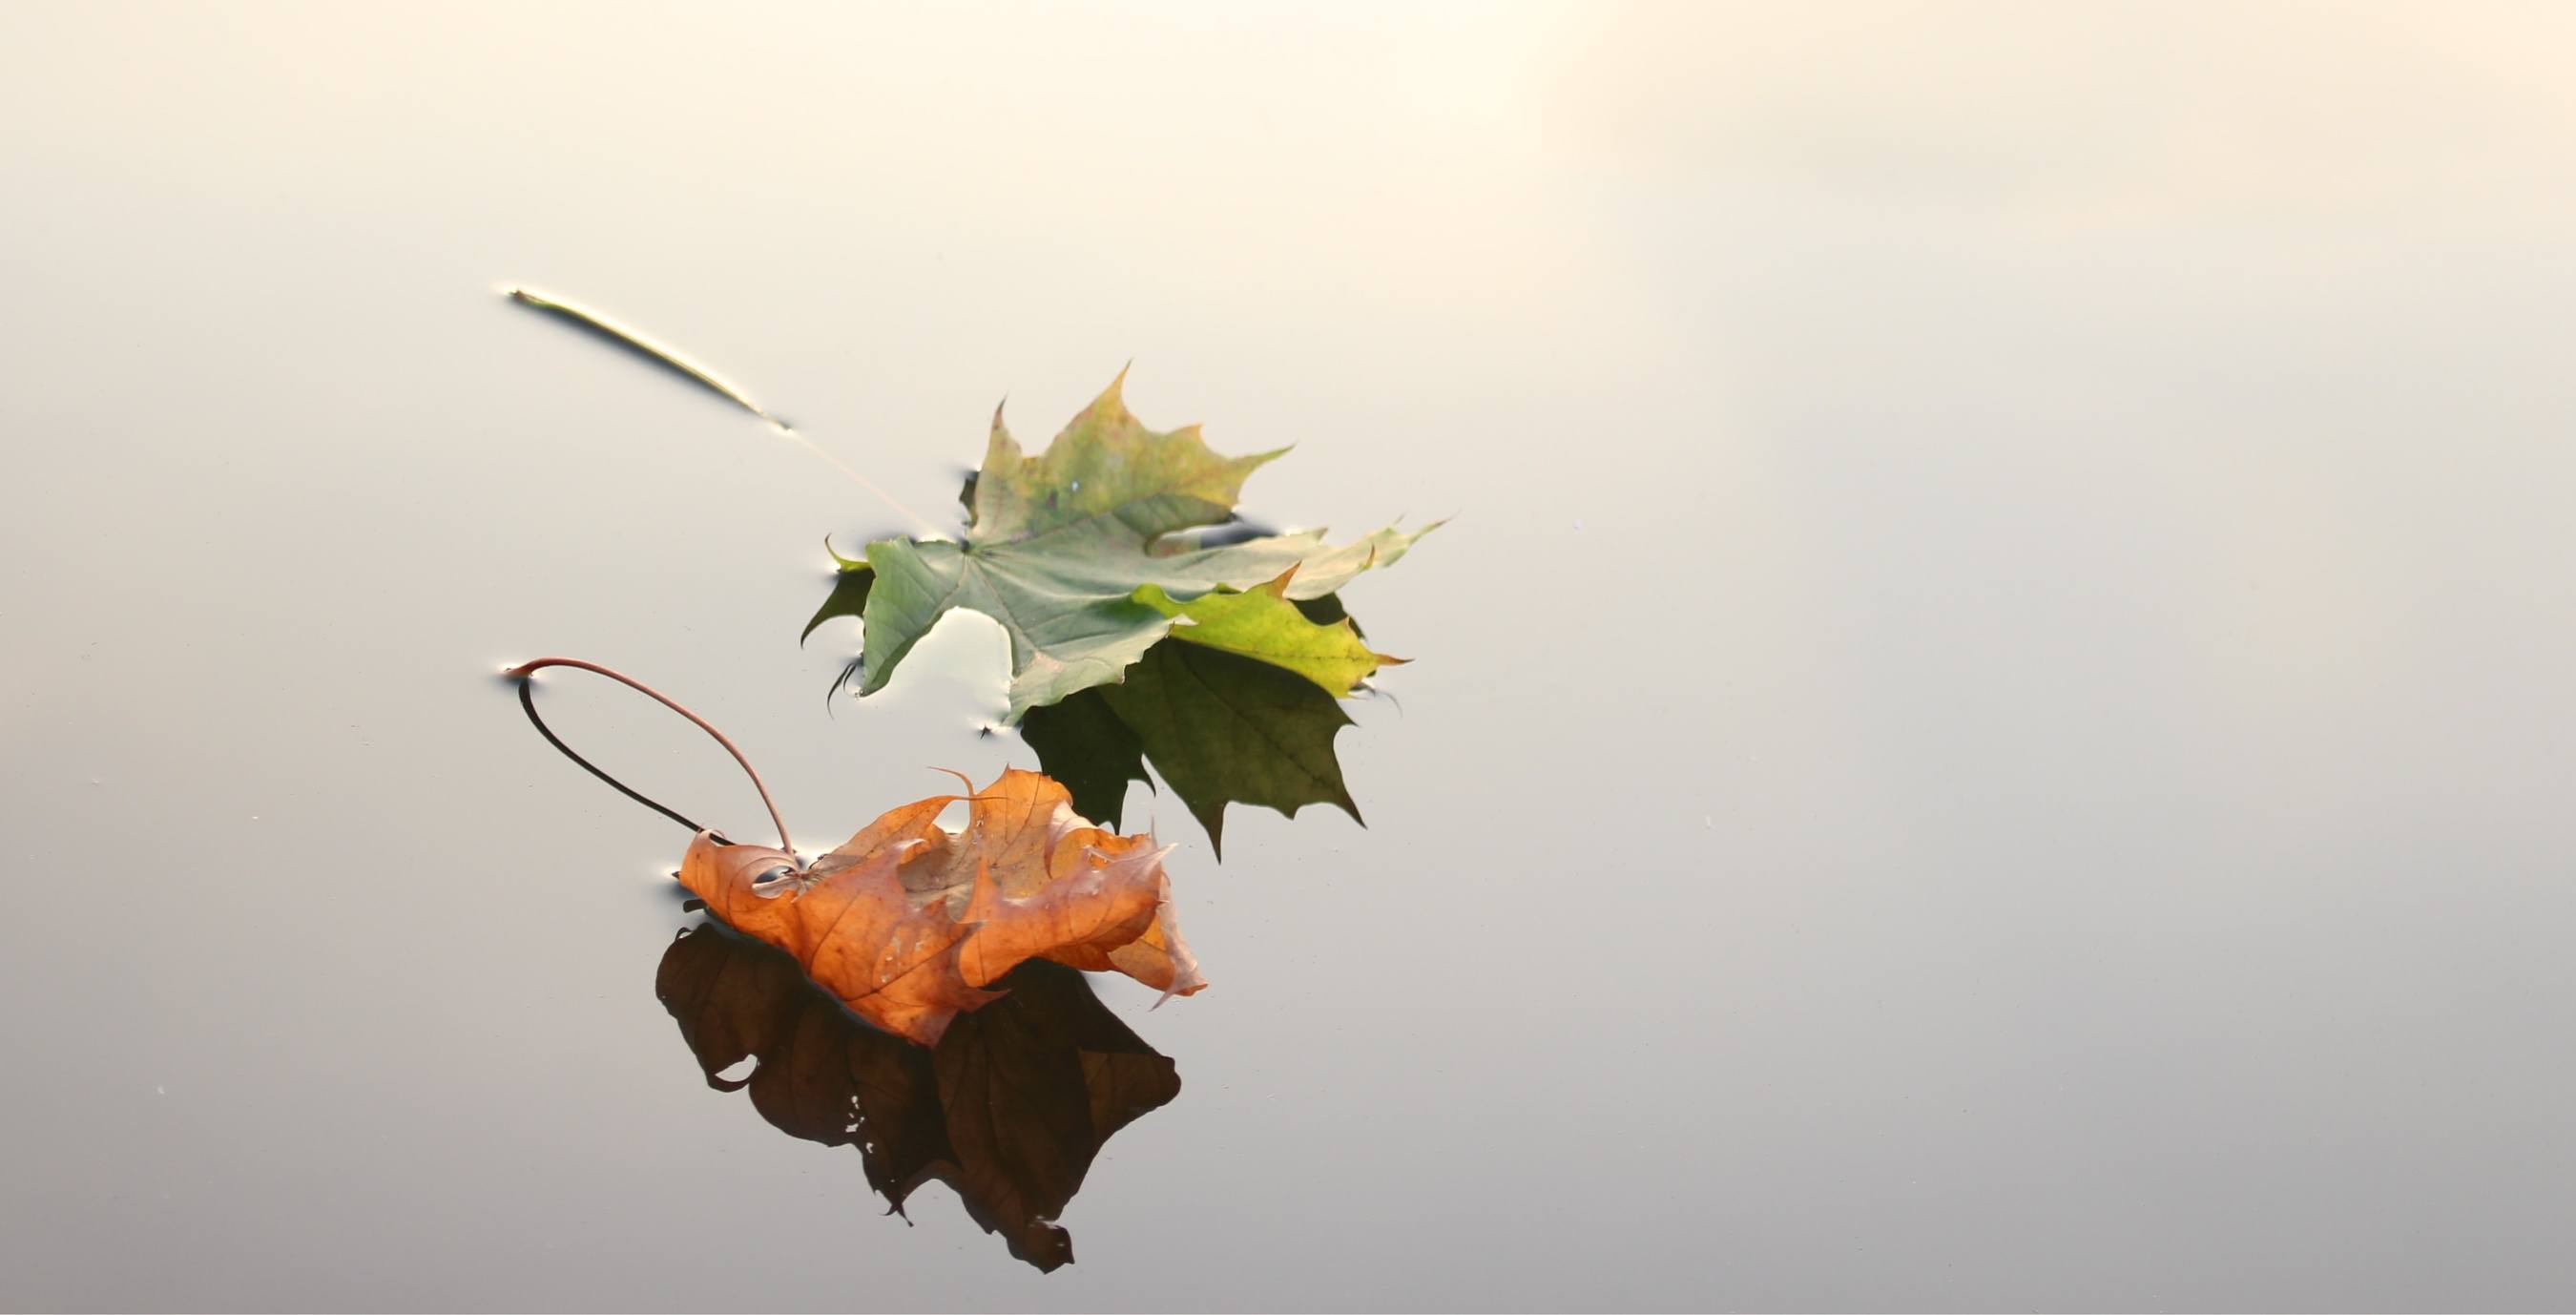 Autumn leaves, one orange and one green, resting on a river